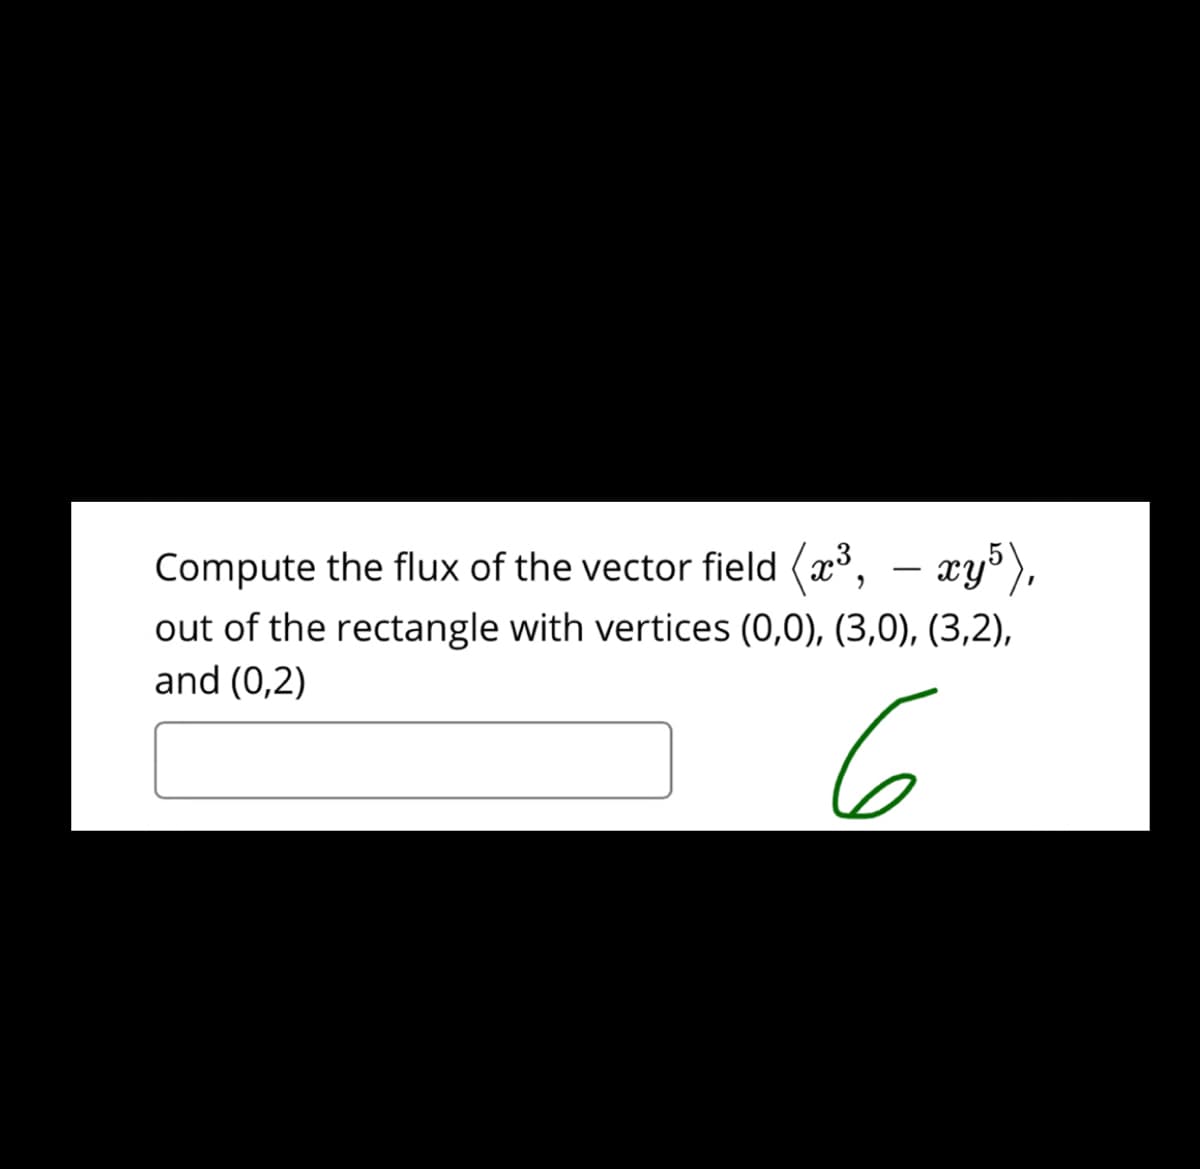 Compute the flux of the vector field (x³,
(2*, – æy³),
out of the rectangle with vertices (0,0), (3,0), (3,2),
and (0,2)
6
